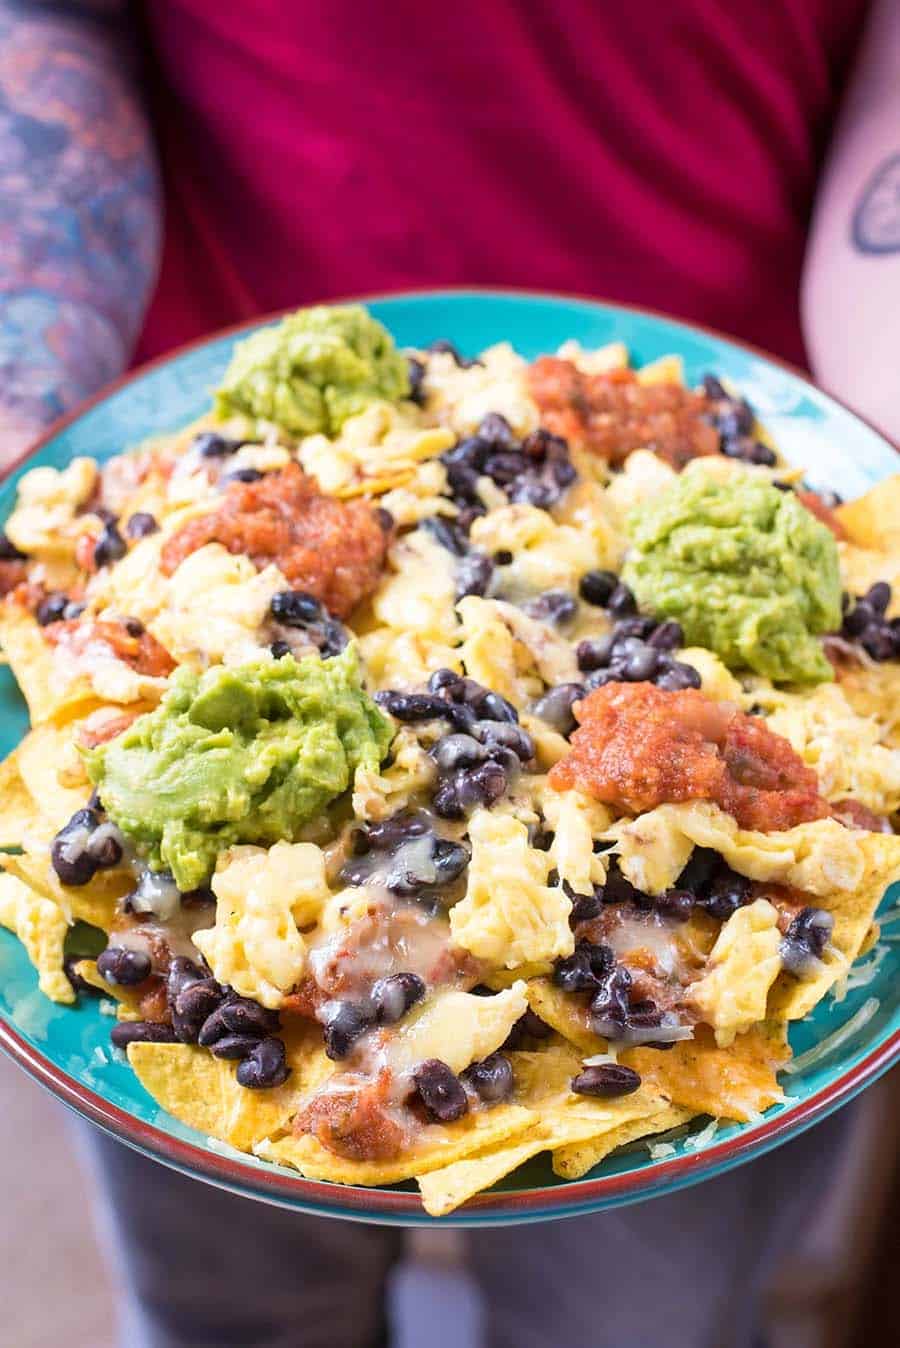 A plate of Nachos being held by someone.